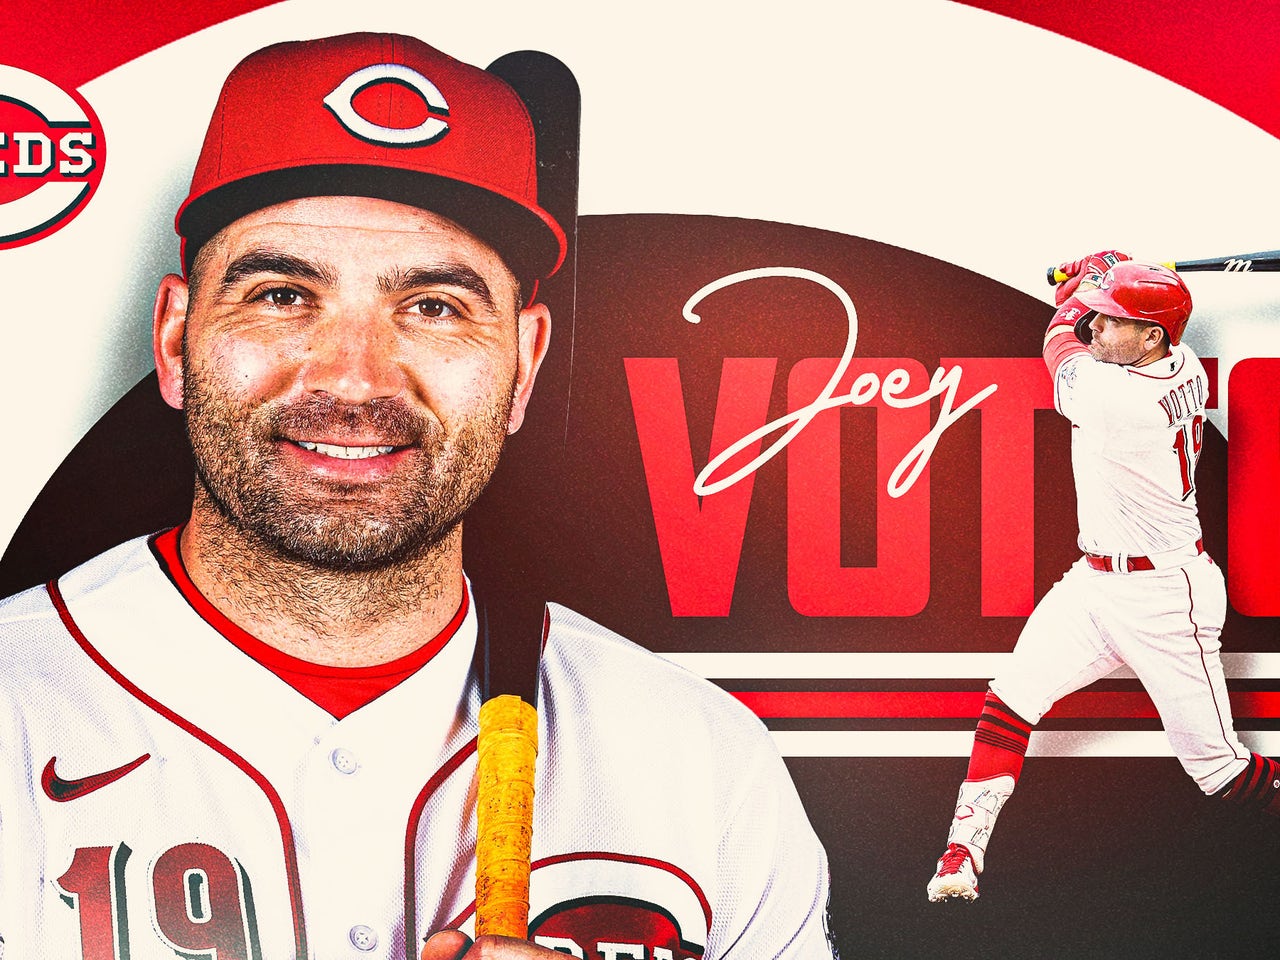 Joey Votto slugs red-hot Reds to victory in 2023 debut: 'This